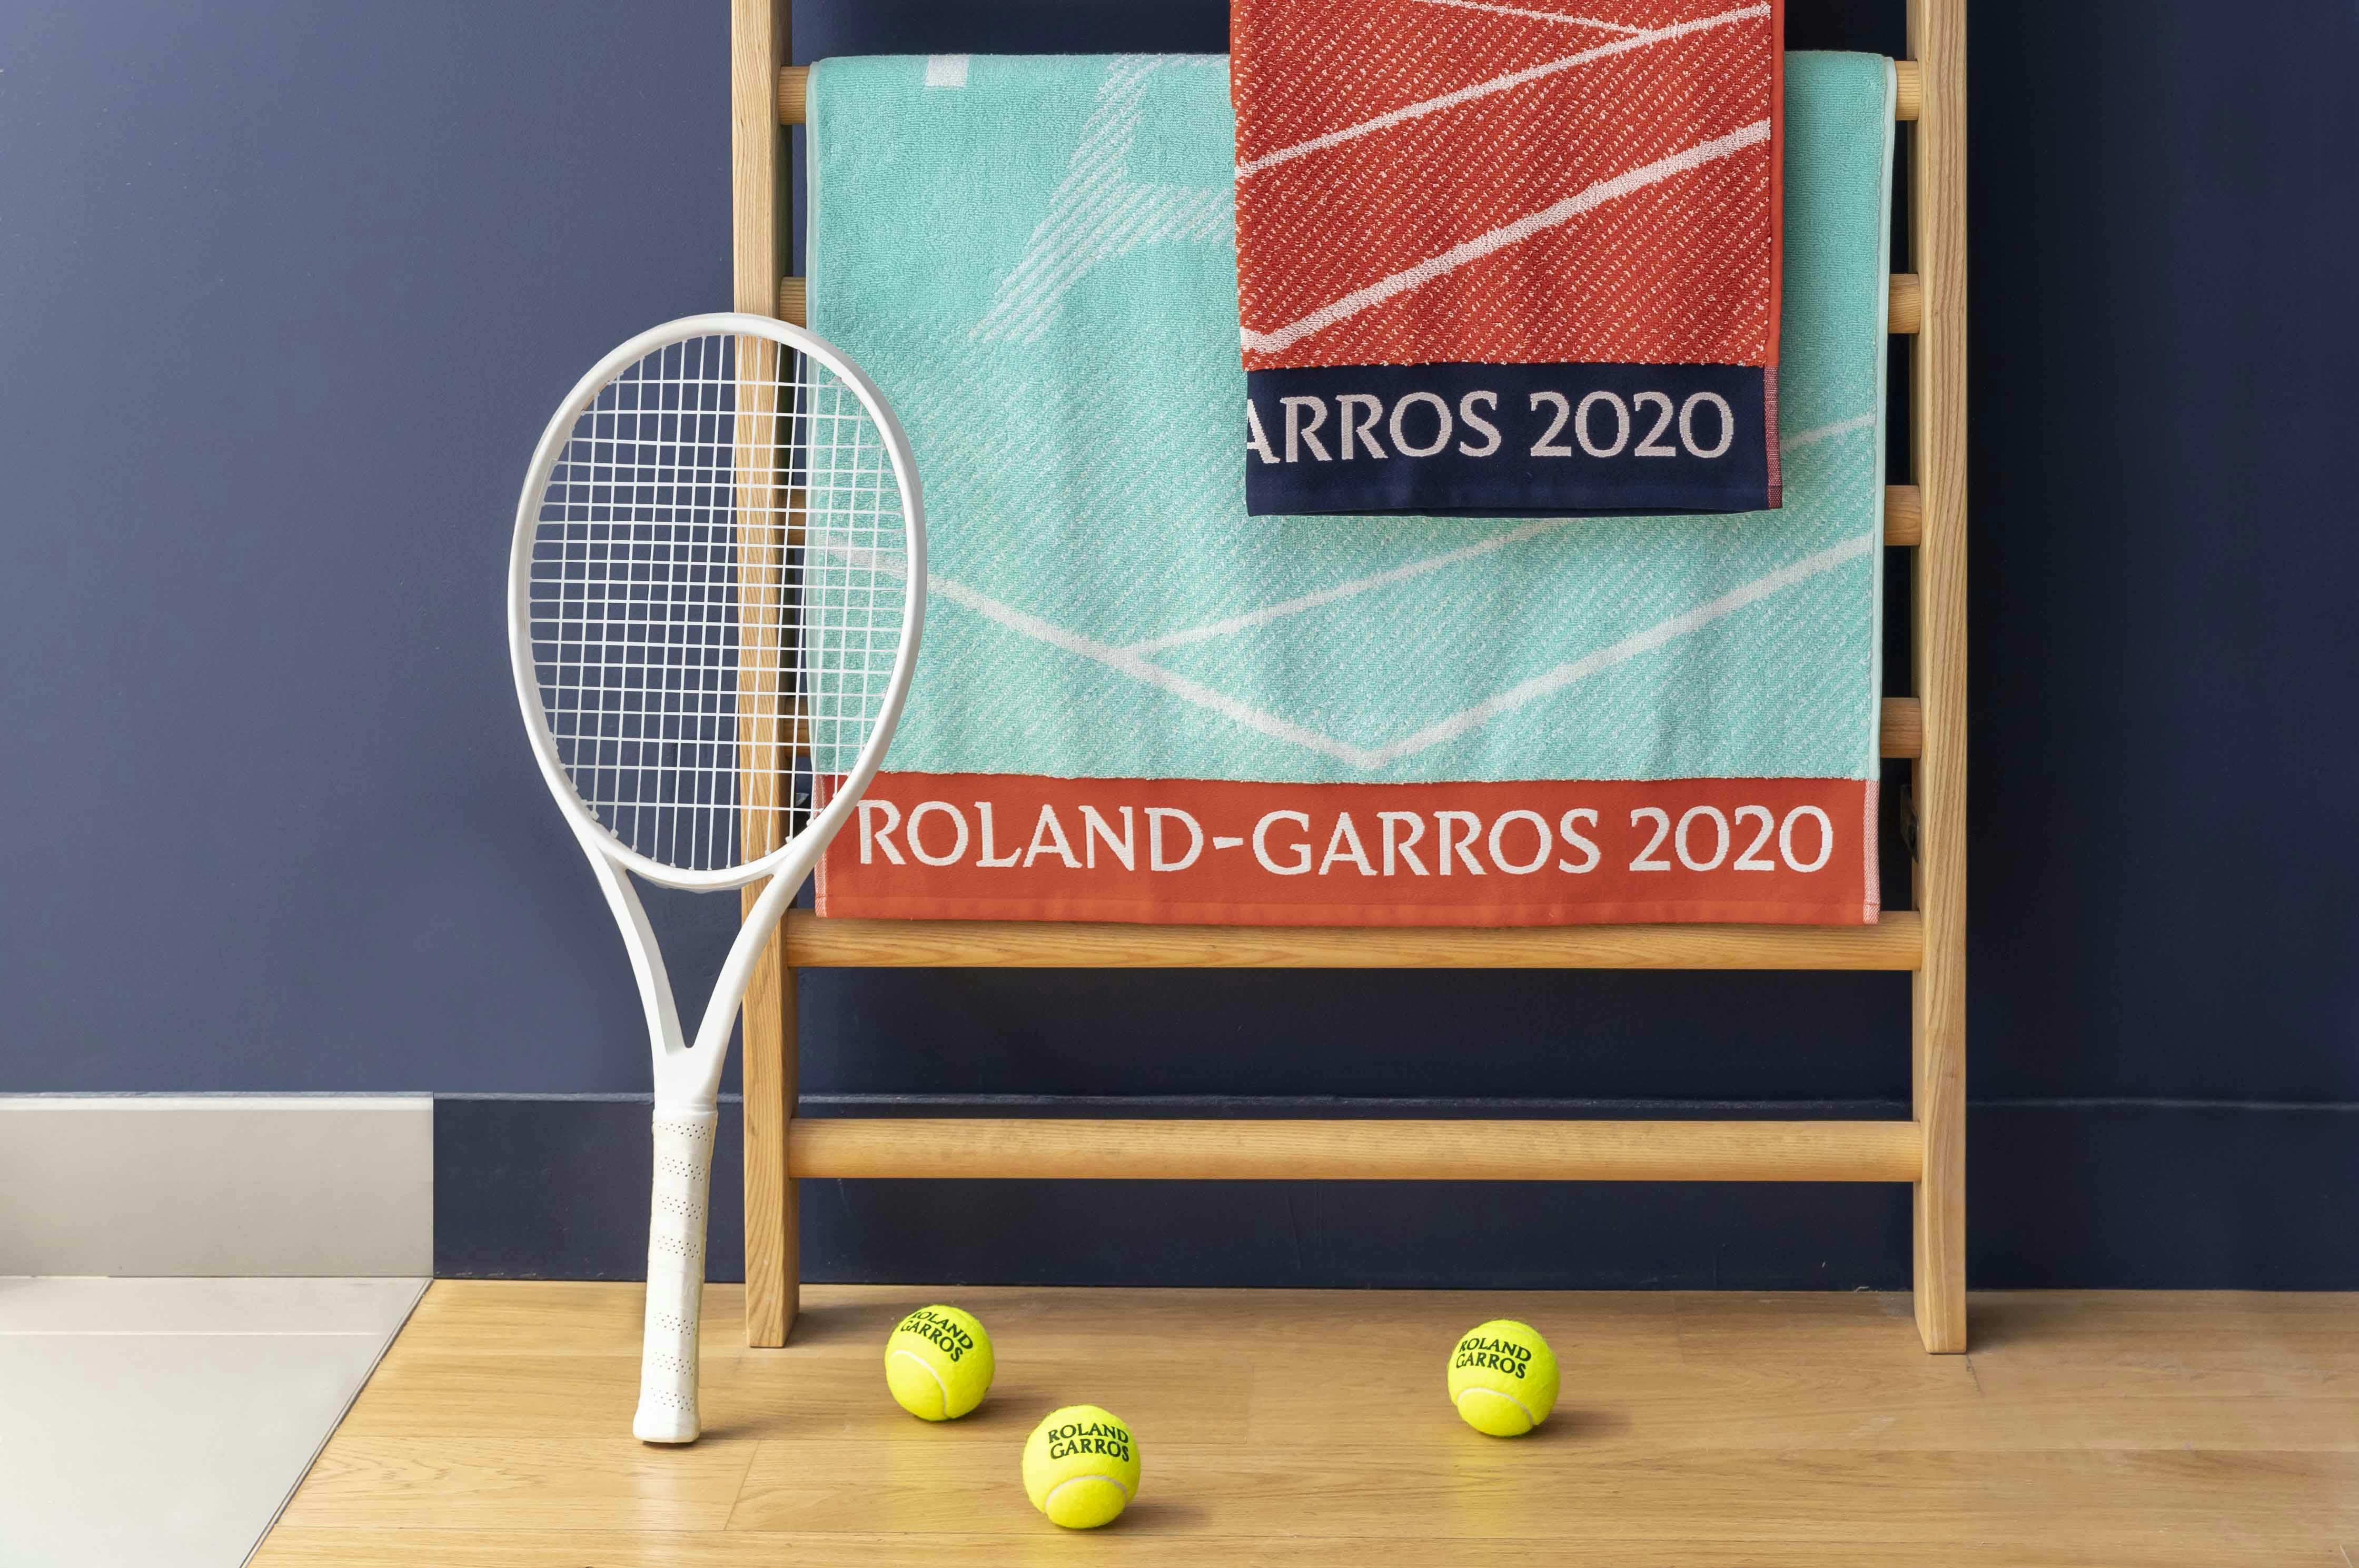 Out with the old, in with the new the official RolandGarros 2020